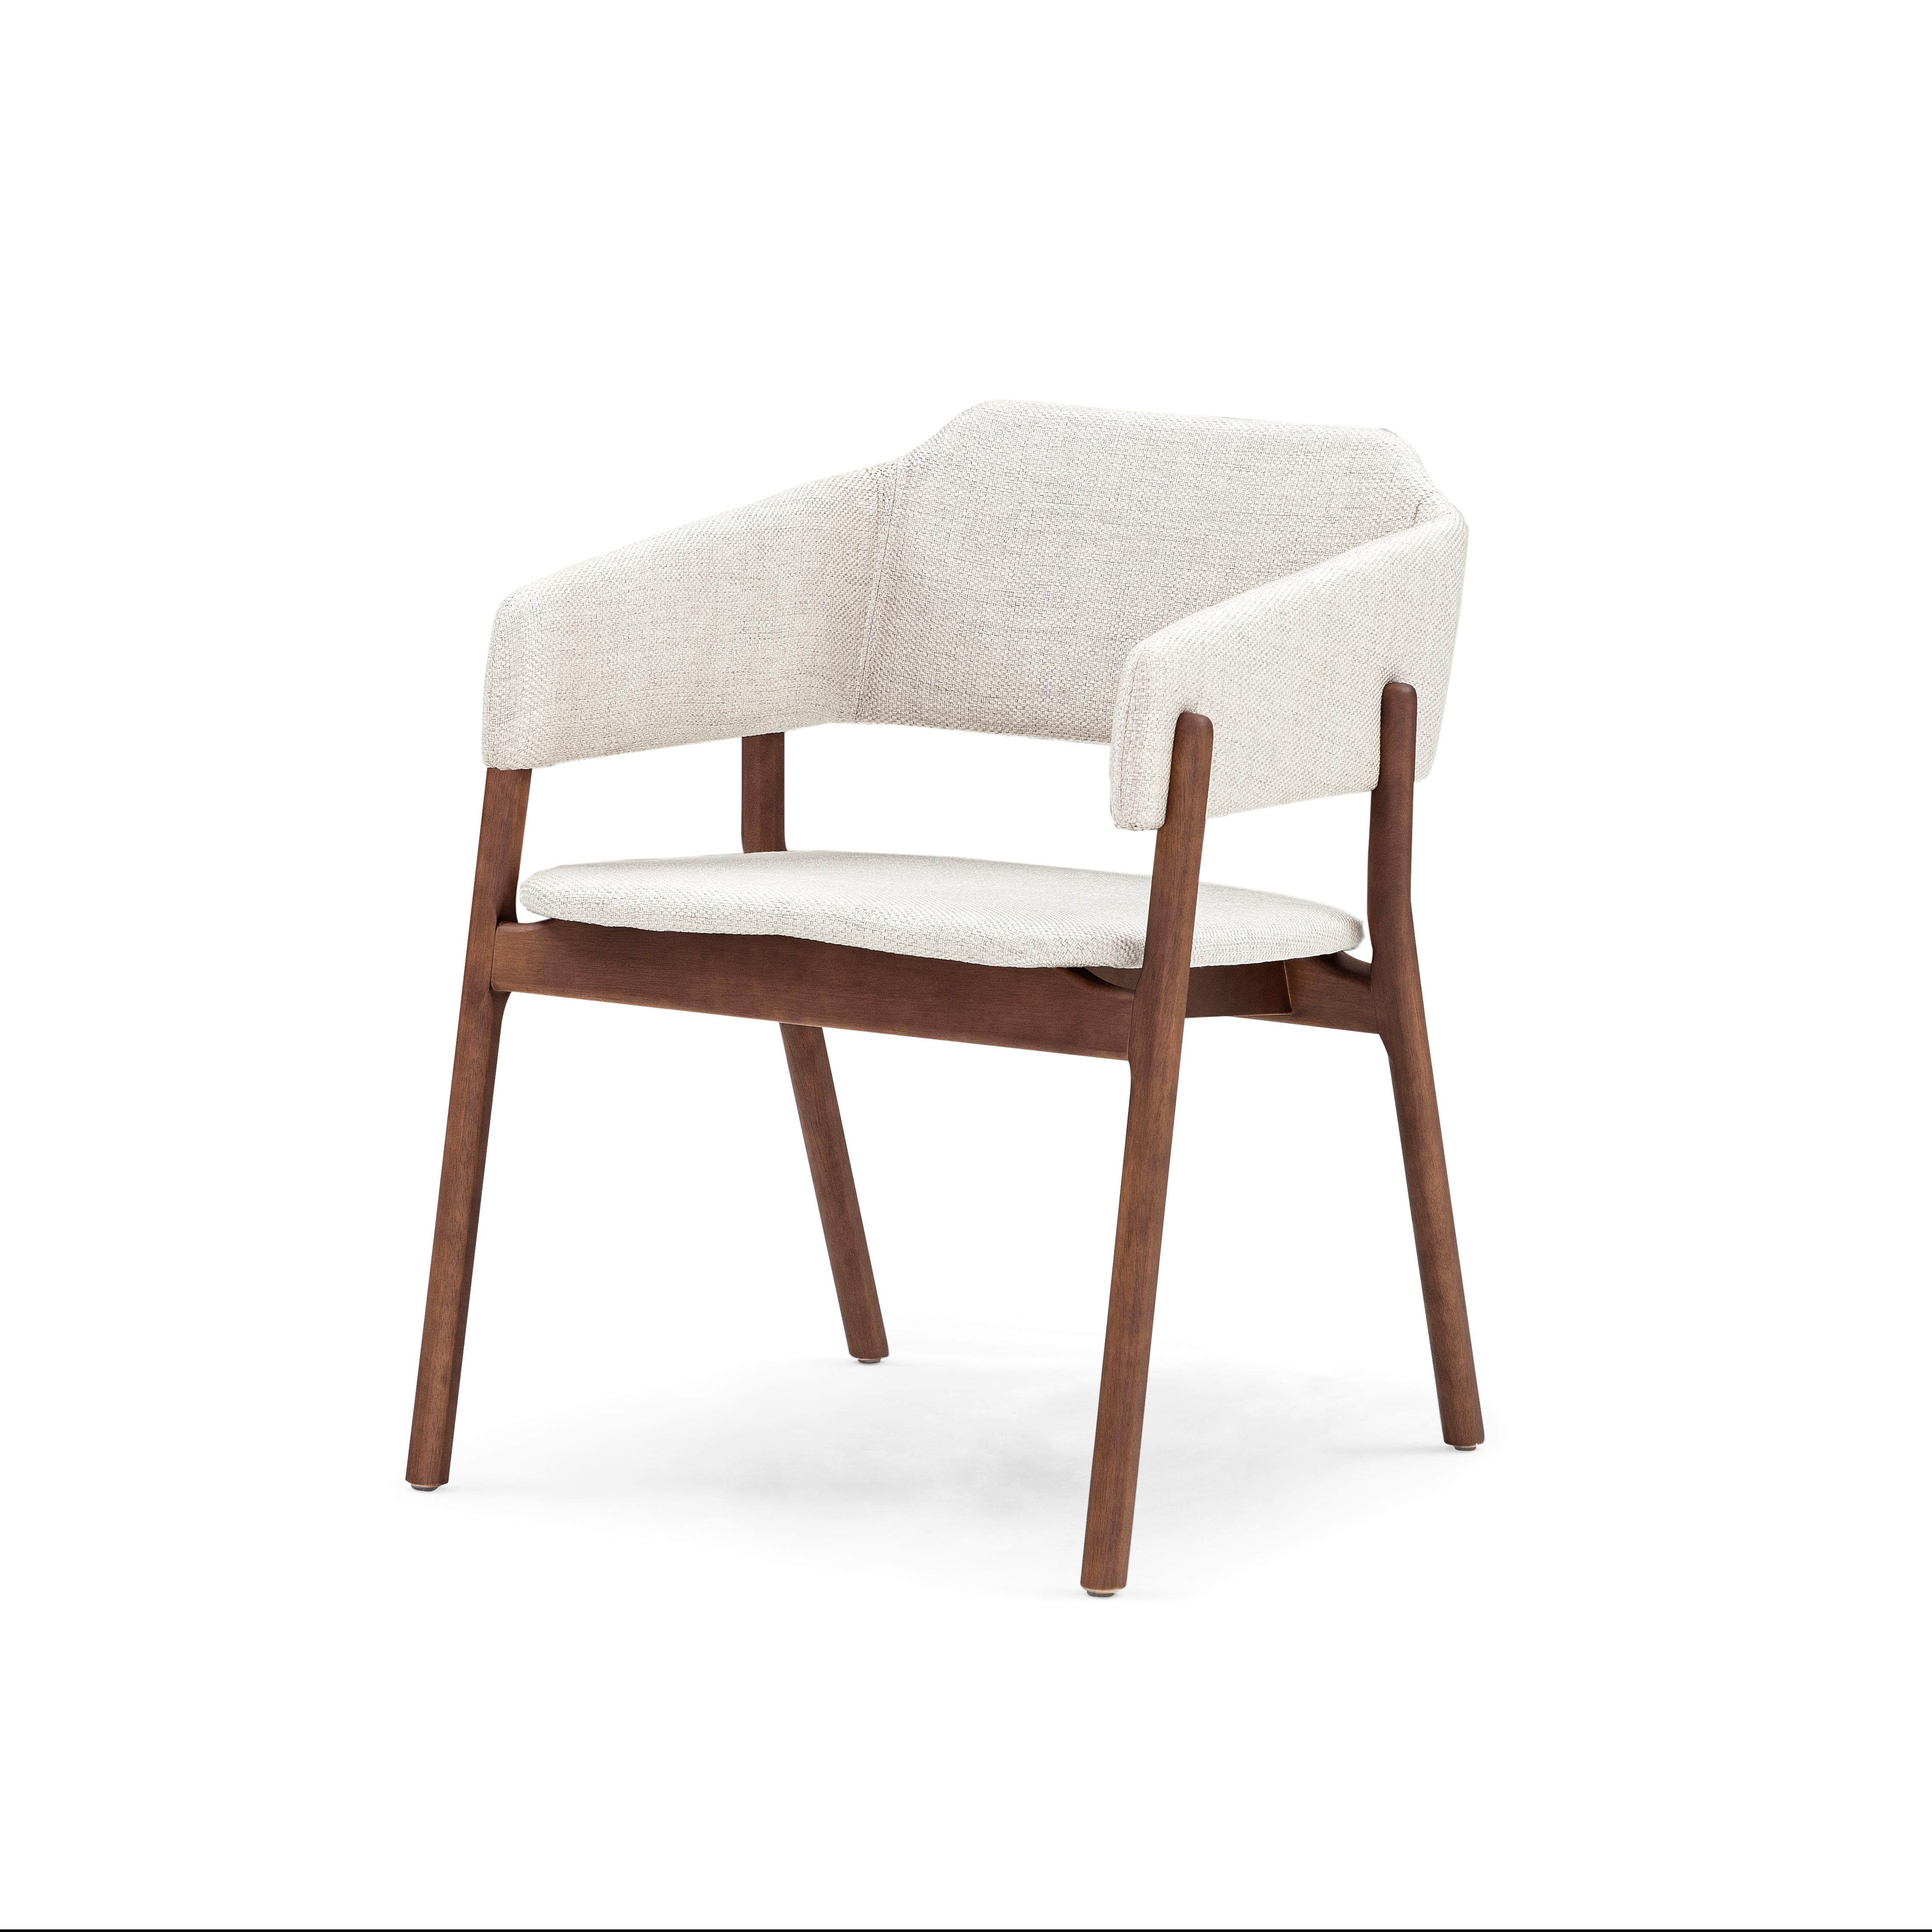 Our Uultis team has created this beautiful Stuzi dining chair to decorate your beautiful dining room table with an off-white fabric and a walnut wood finish. This chair has a beautifully simple but elegant design that is going to perfectly go to